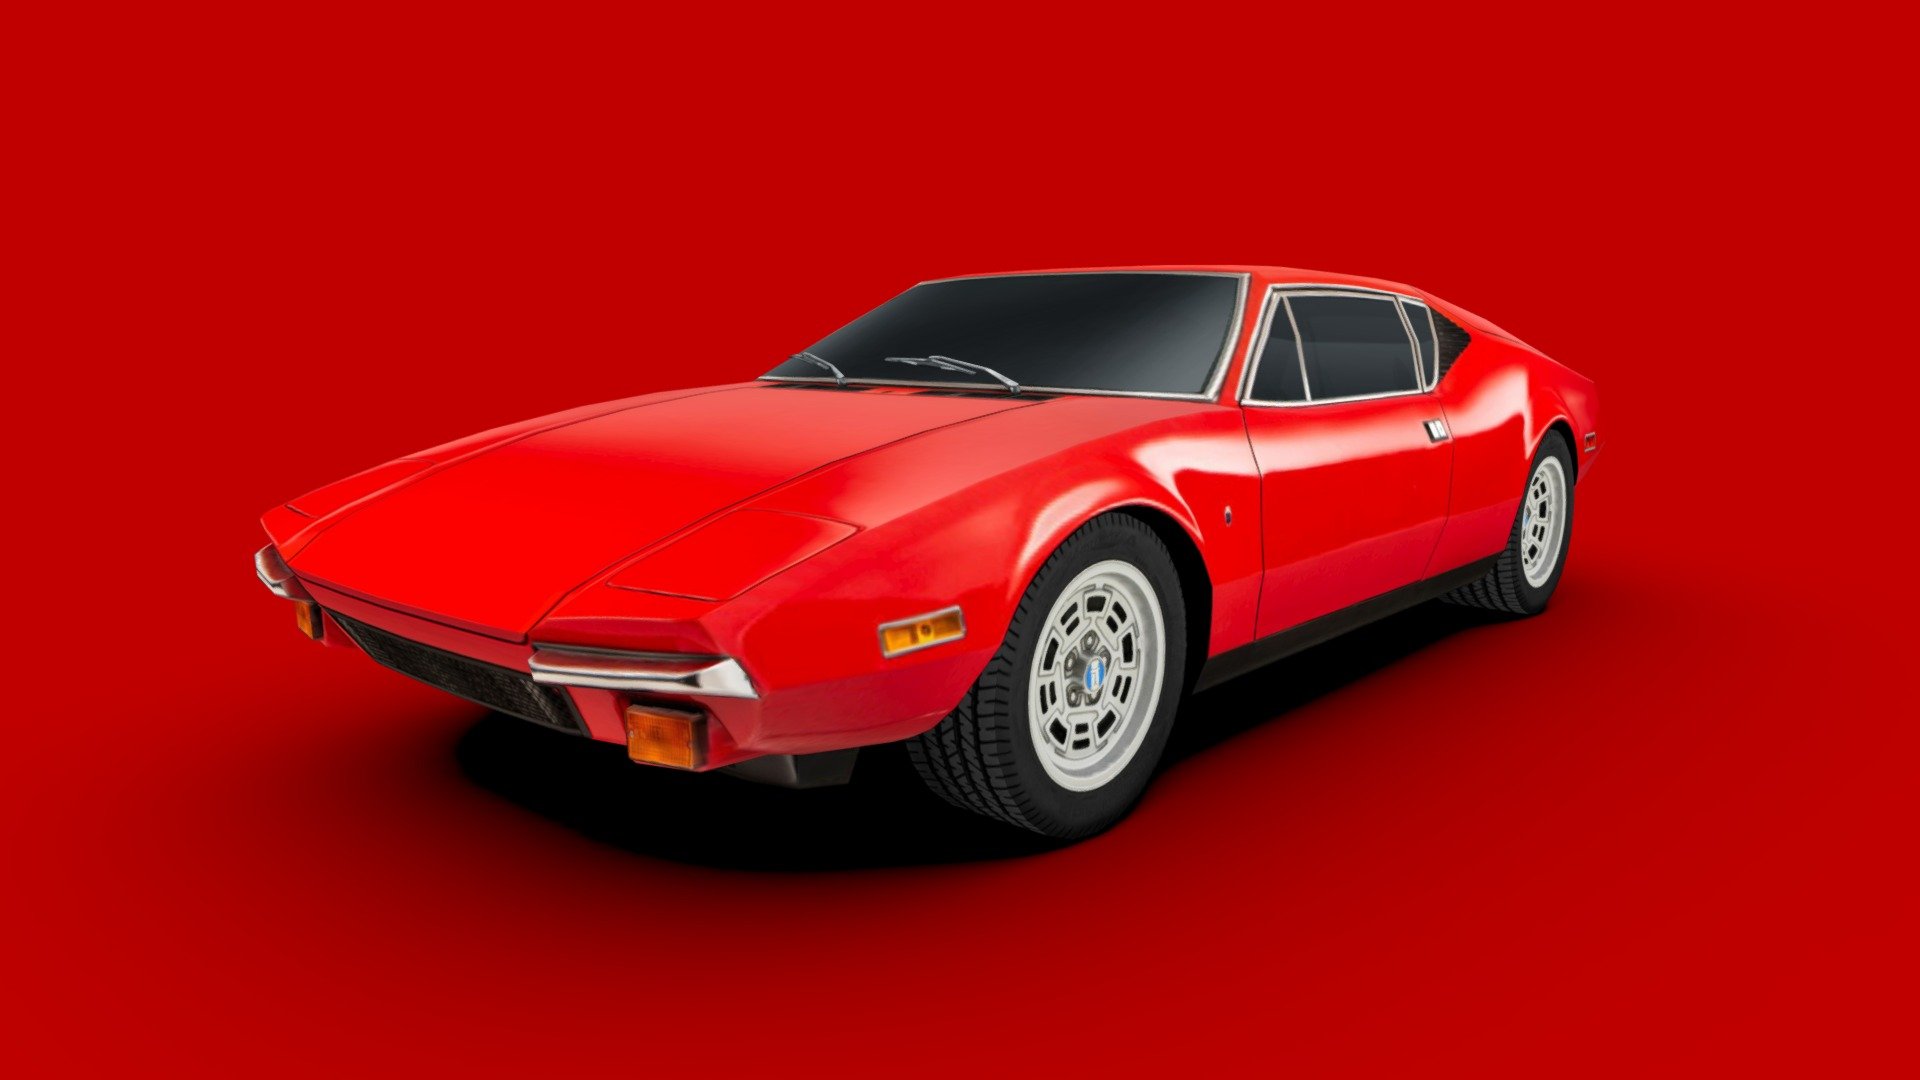 3d model of the 1974 De Tomaso Pantera, a 2-door coupe sports car

The model is very low-poly, full-scale, real photos texture (single 2048 x 2048 png).

Package includes 5 file formats and texture (3ds, fbx, dae, obj and skp)

Hope you enjoy it.

José Bronze - De Tomaso Pantera 1974 - Buy Royalty Free 3D model by Jose Bronze (@pinceladas3d) 3d model